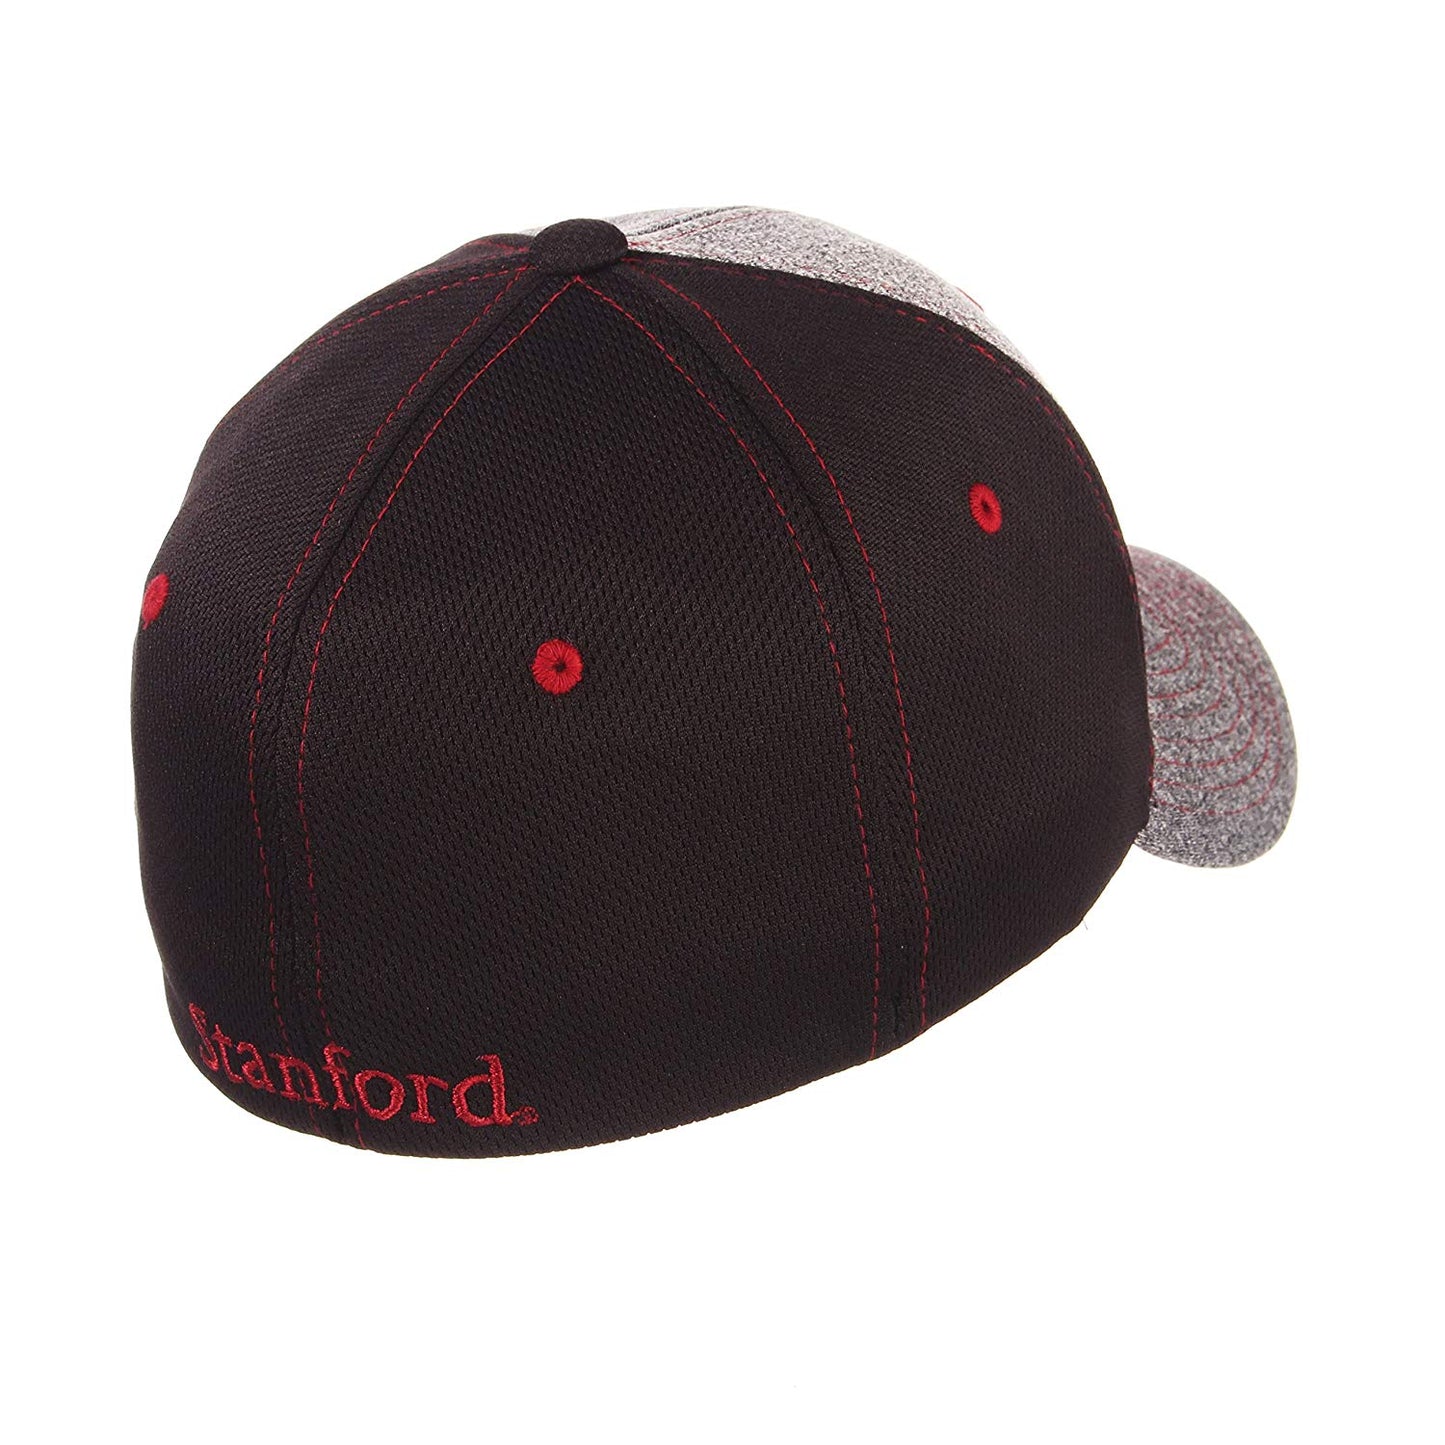 Stanford Cardinal Zephyr Graphite Two Tone Stretch Fit Hat